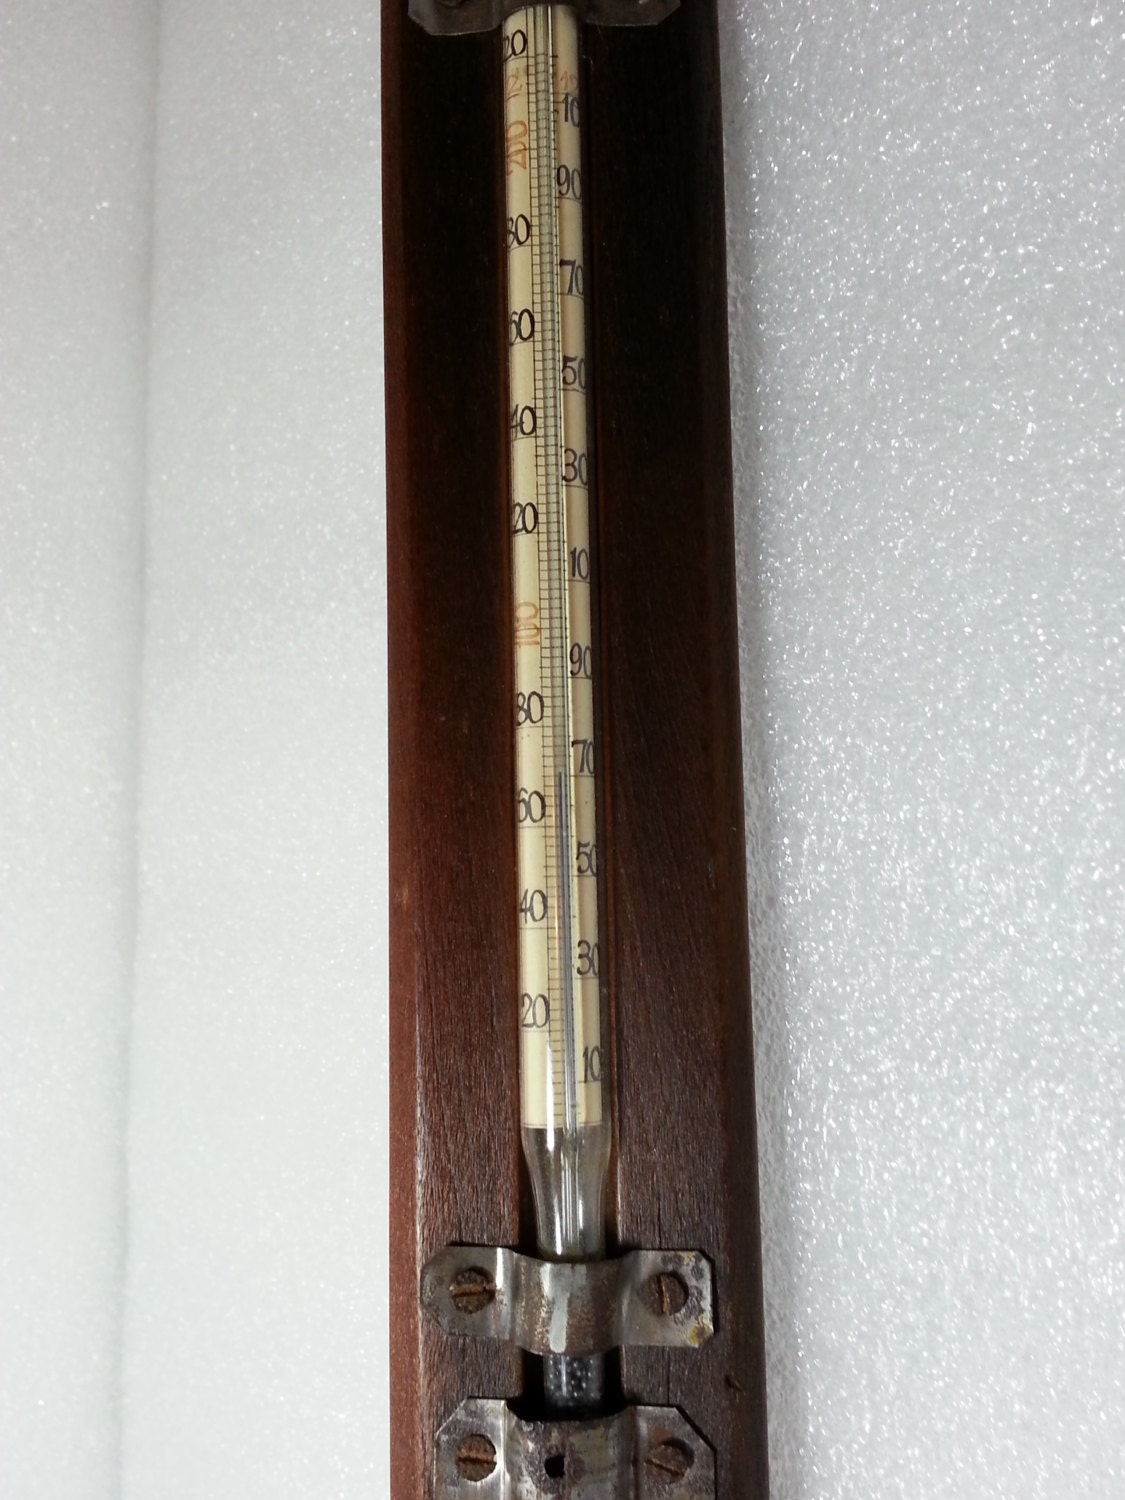 Vintage Dairy Pasteurizing Thermometer - Home Decor - Wall Hanging